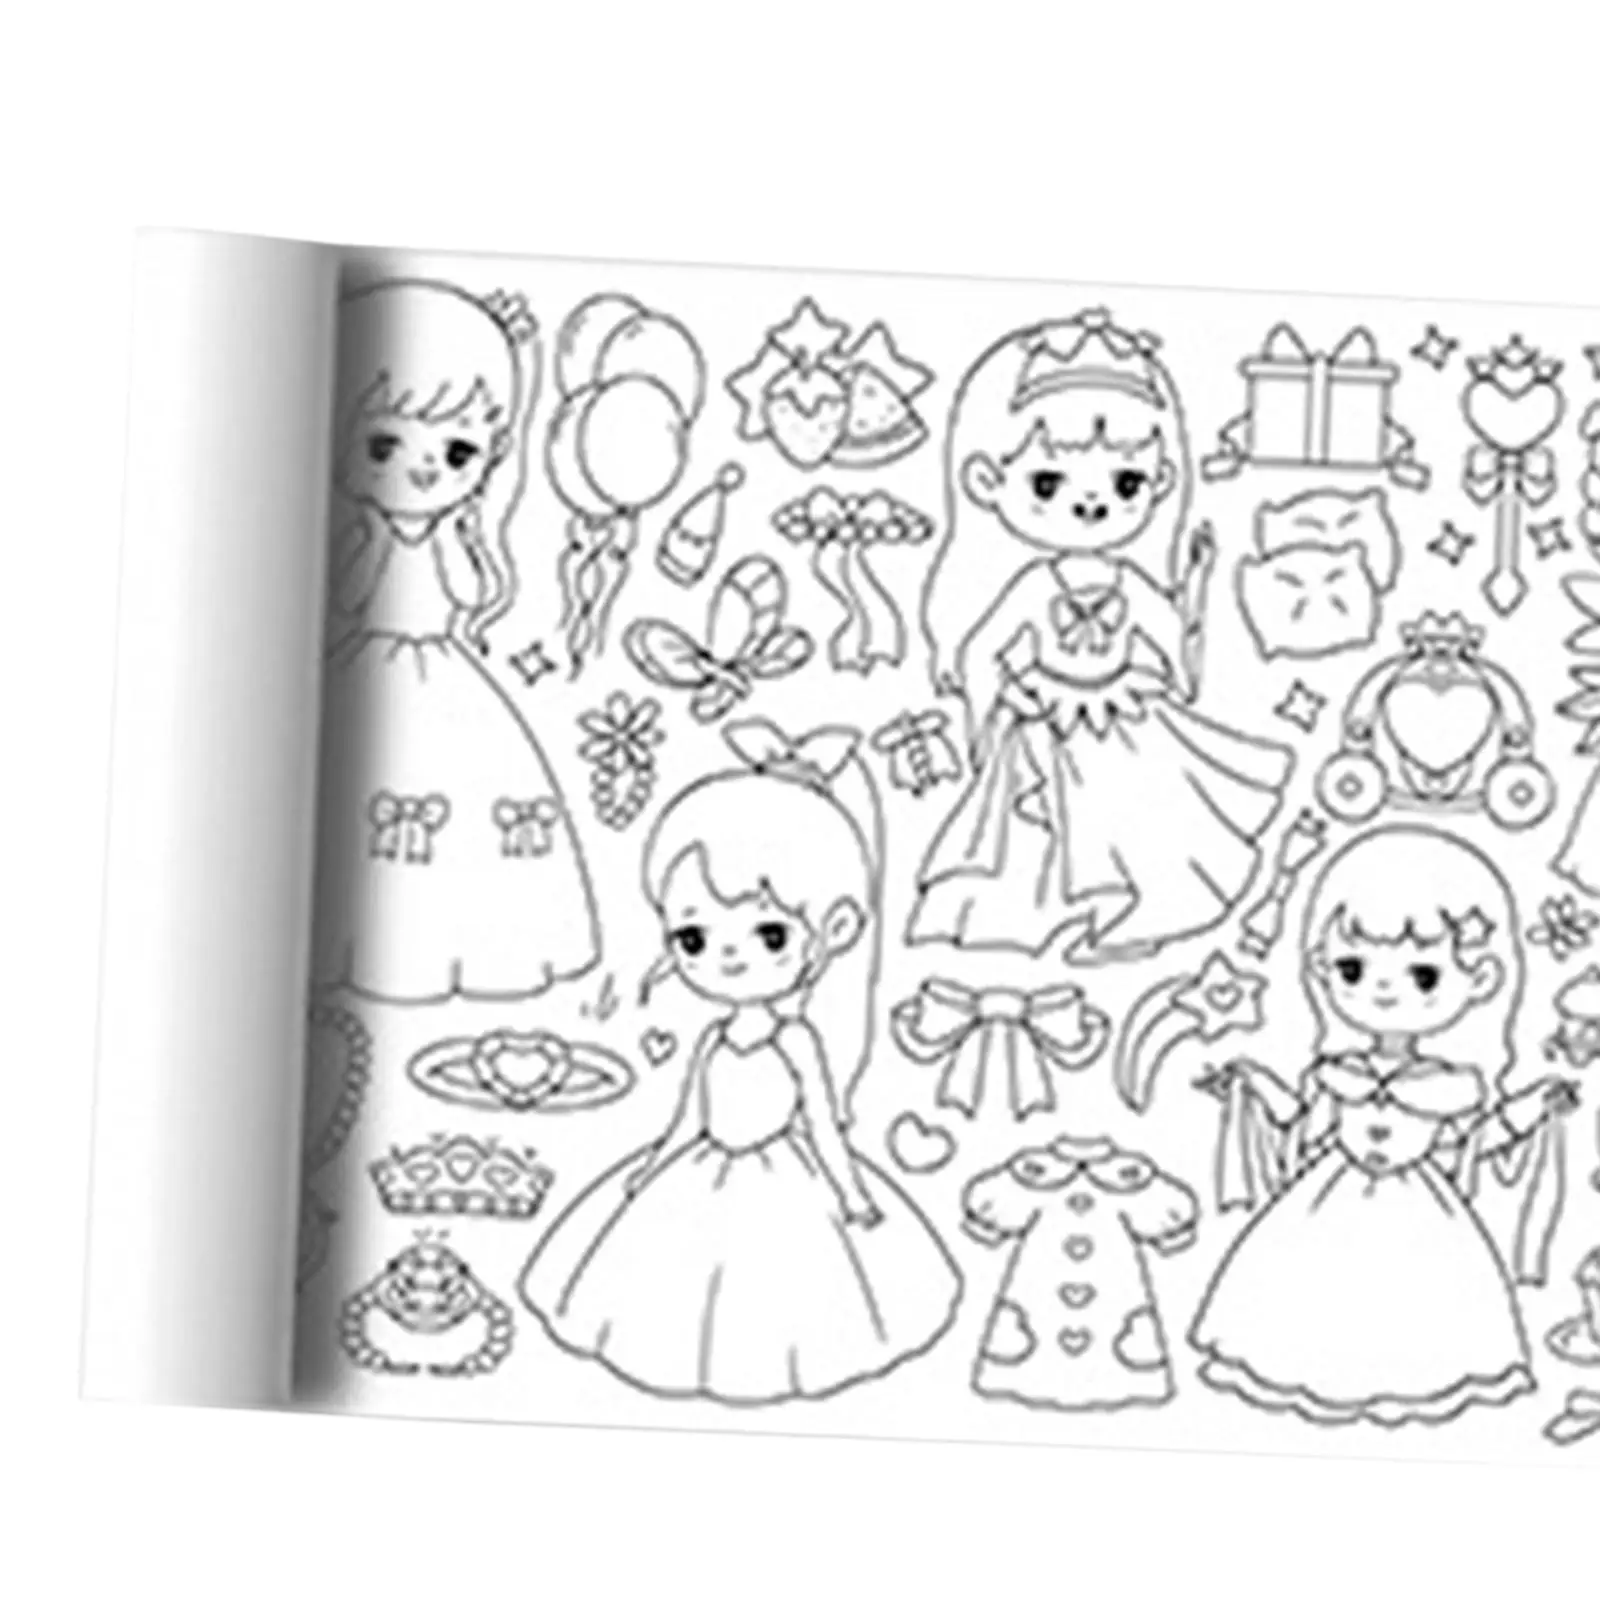 Coloring Paper Roll Coloring Book  Princess Pattern Sticky Drawing Wall Coloring Sheets for Children Home Birthday